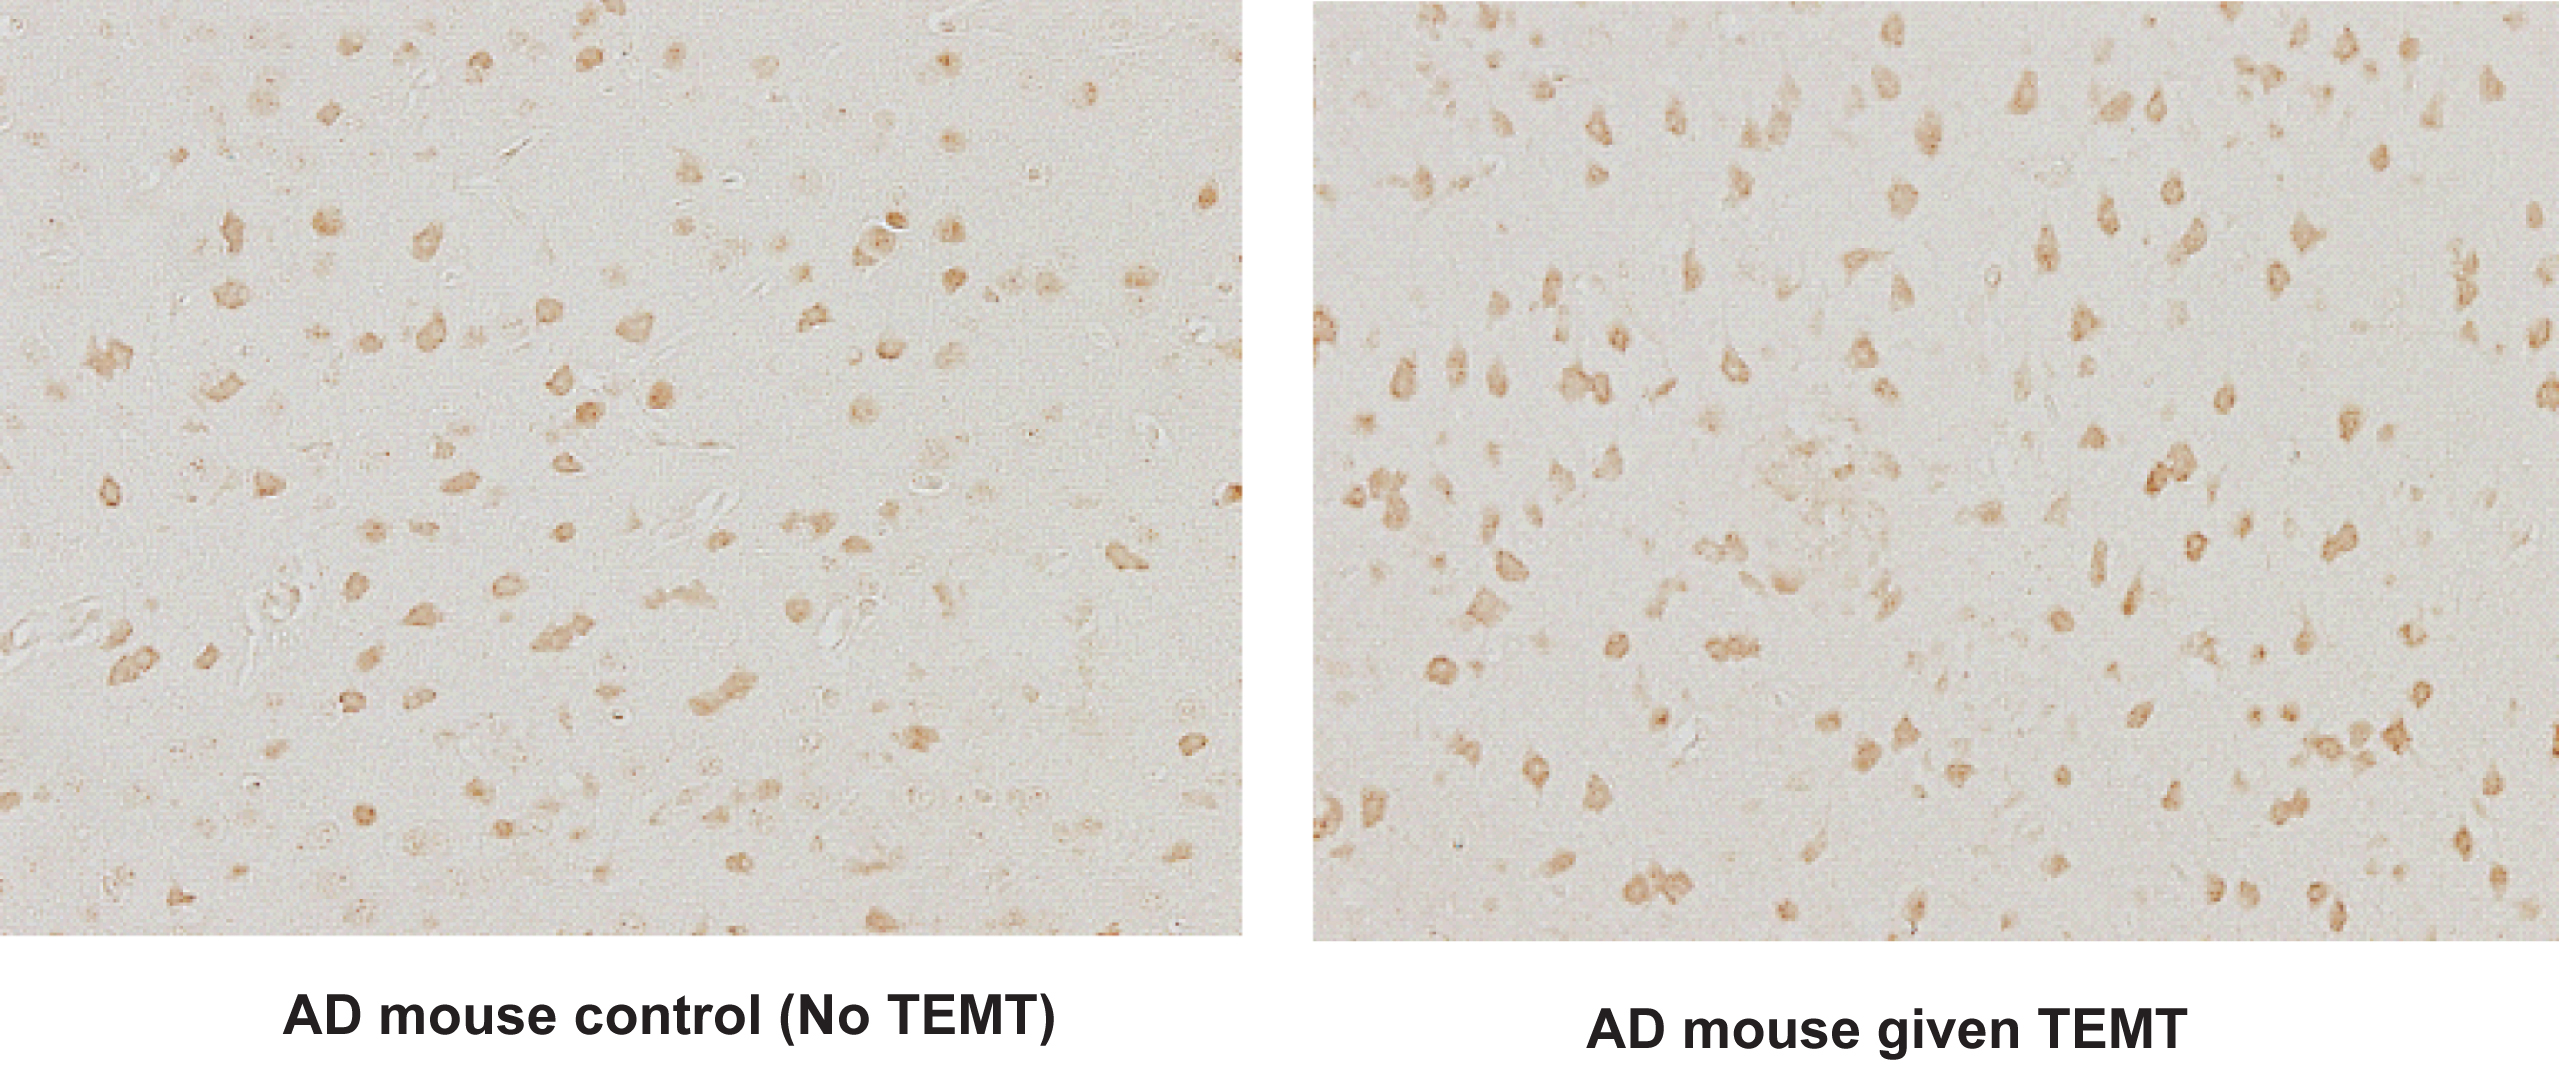 TEMT increases neuronal activity in entorhinal cortex of aged AD mice, as indicated by the number of cFos-stained neurons. Note increased number of active neurons in AD mice given long-term TEMT (right) compared to control AD mice not given TEMT (left). For AD and normal mice, average number of c-Fos-stained neurons in entorhinal cortex from five representative fields increased from 83 neurons per field in controls to 100 neurons per field after TEMT (↑21%; p < 0.02).